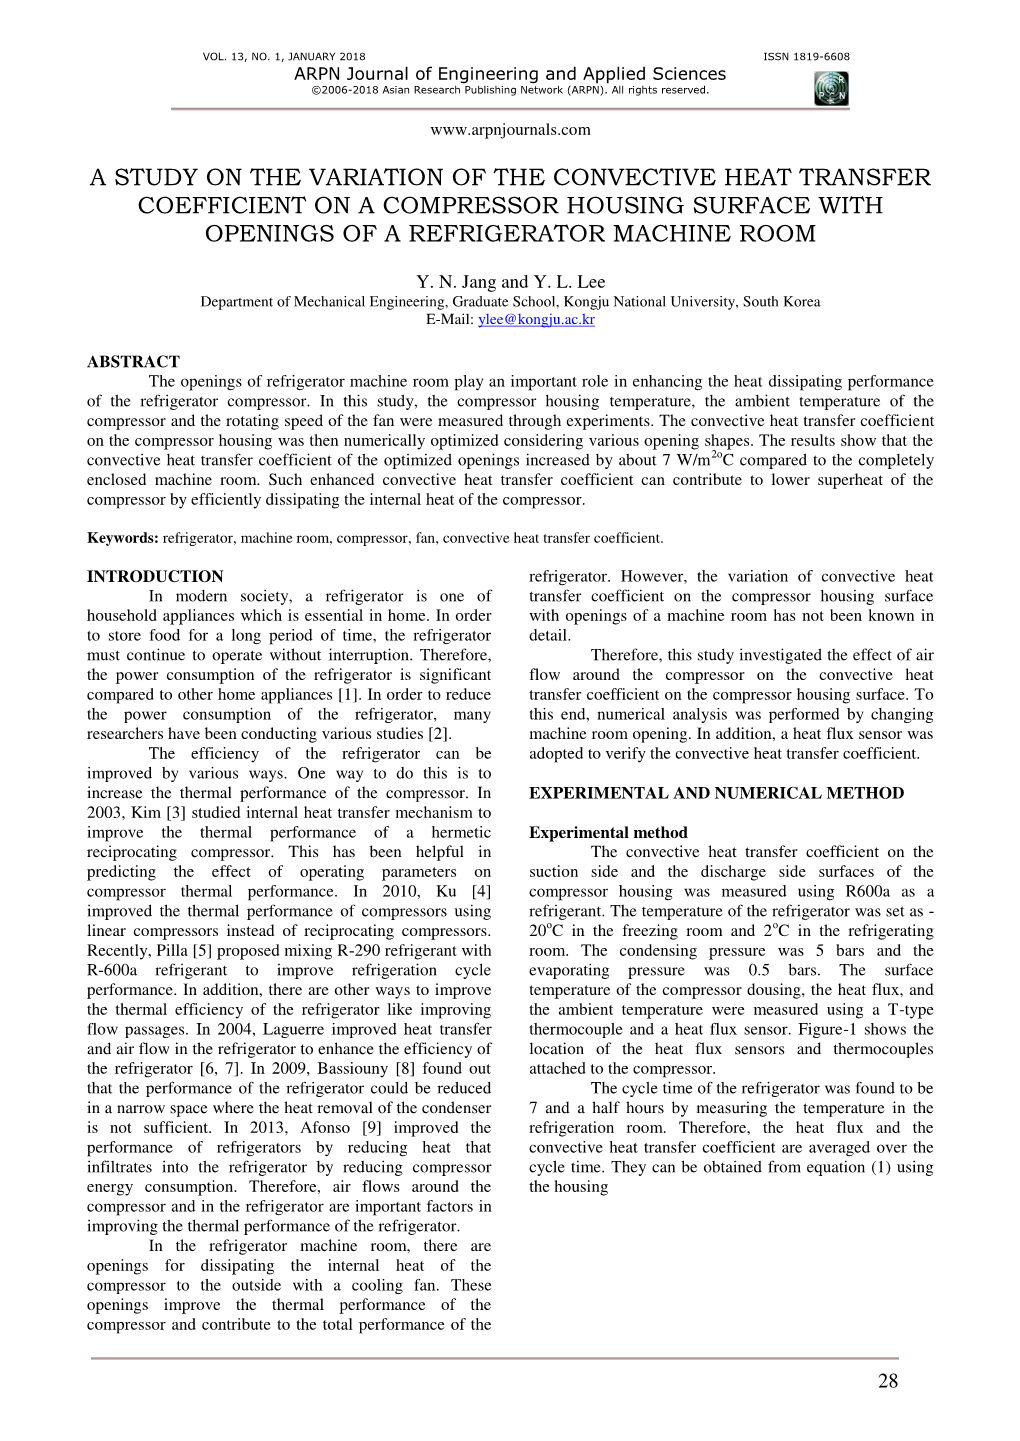 A Study on the Variation of the Convective Heat Transfer Coefficient on a Compressor Housing Surface with Openings of a Refrigerator Machine Room